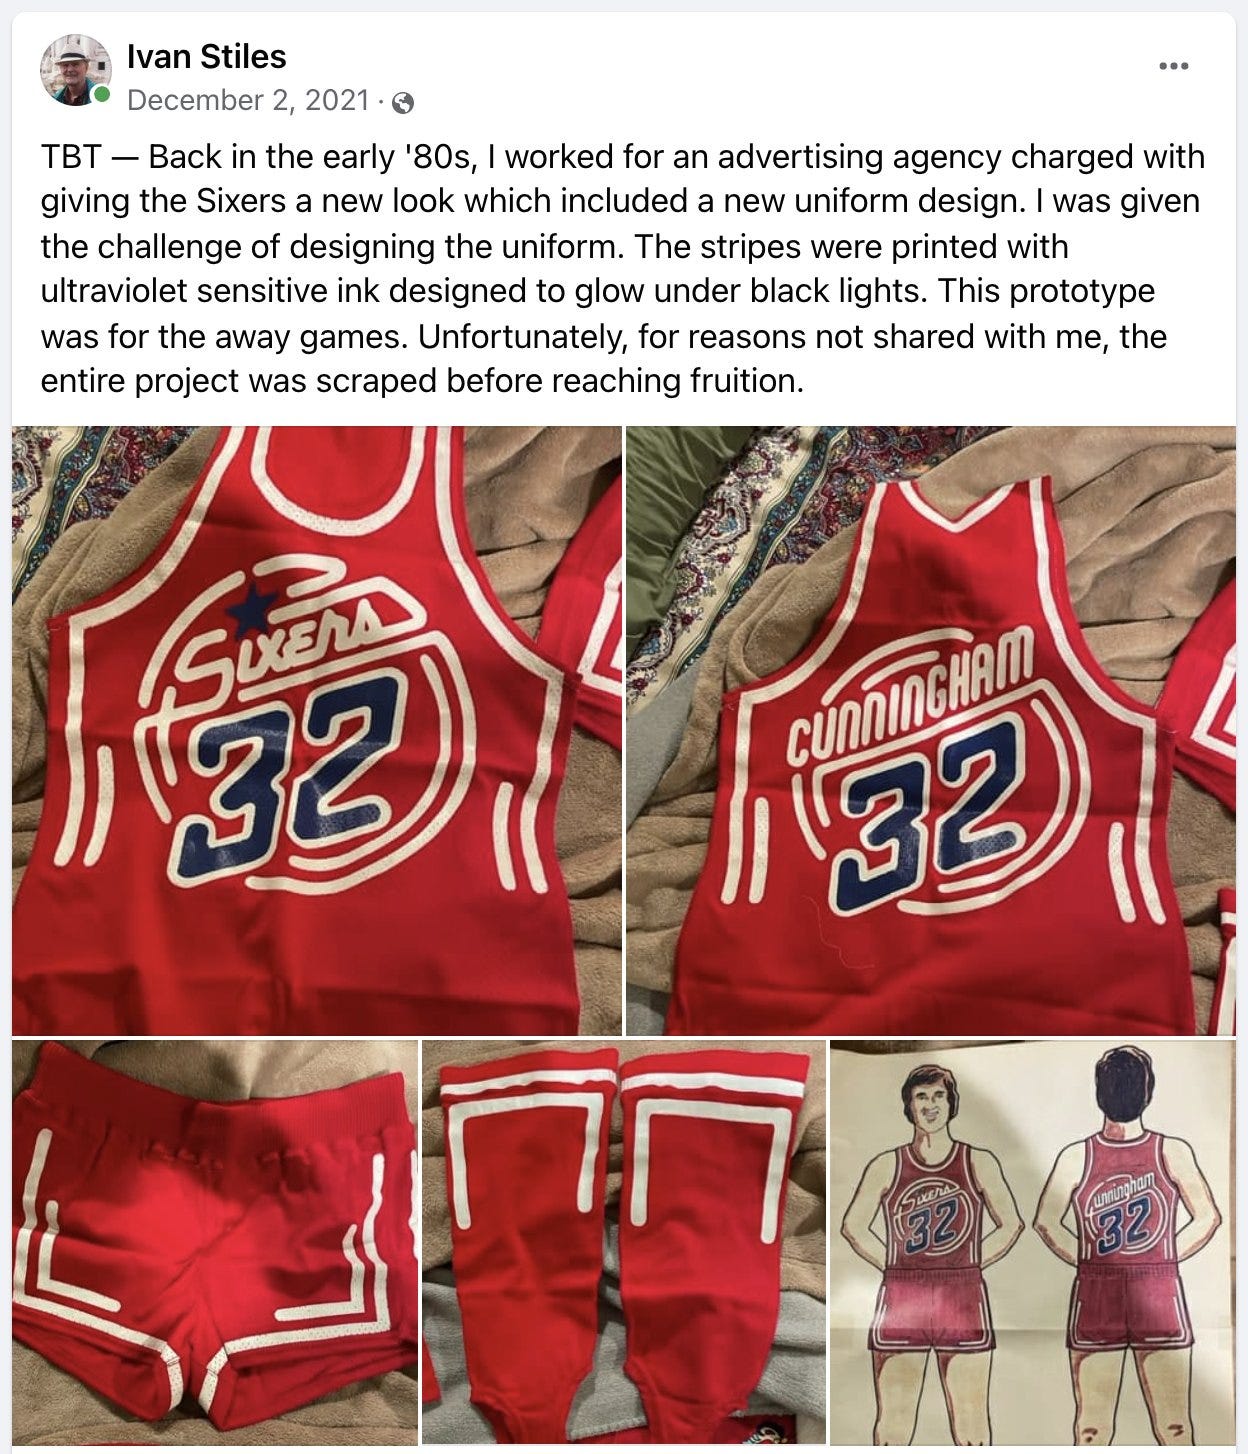 sixers away jersey